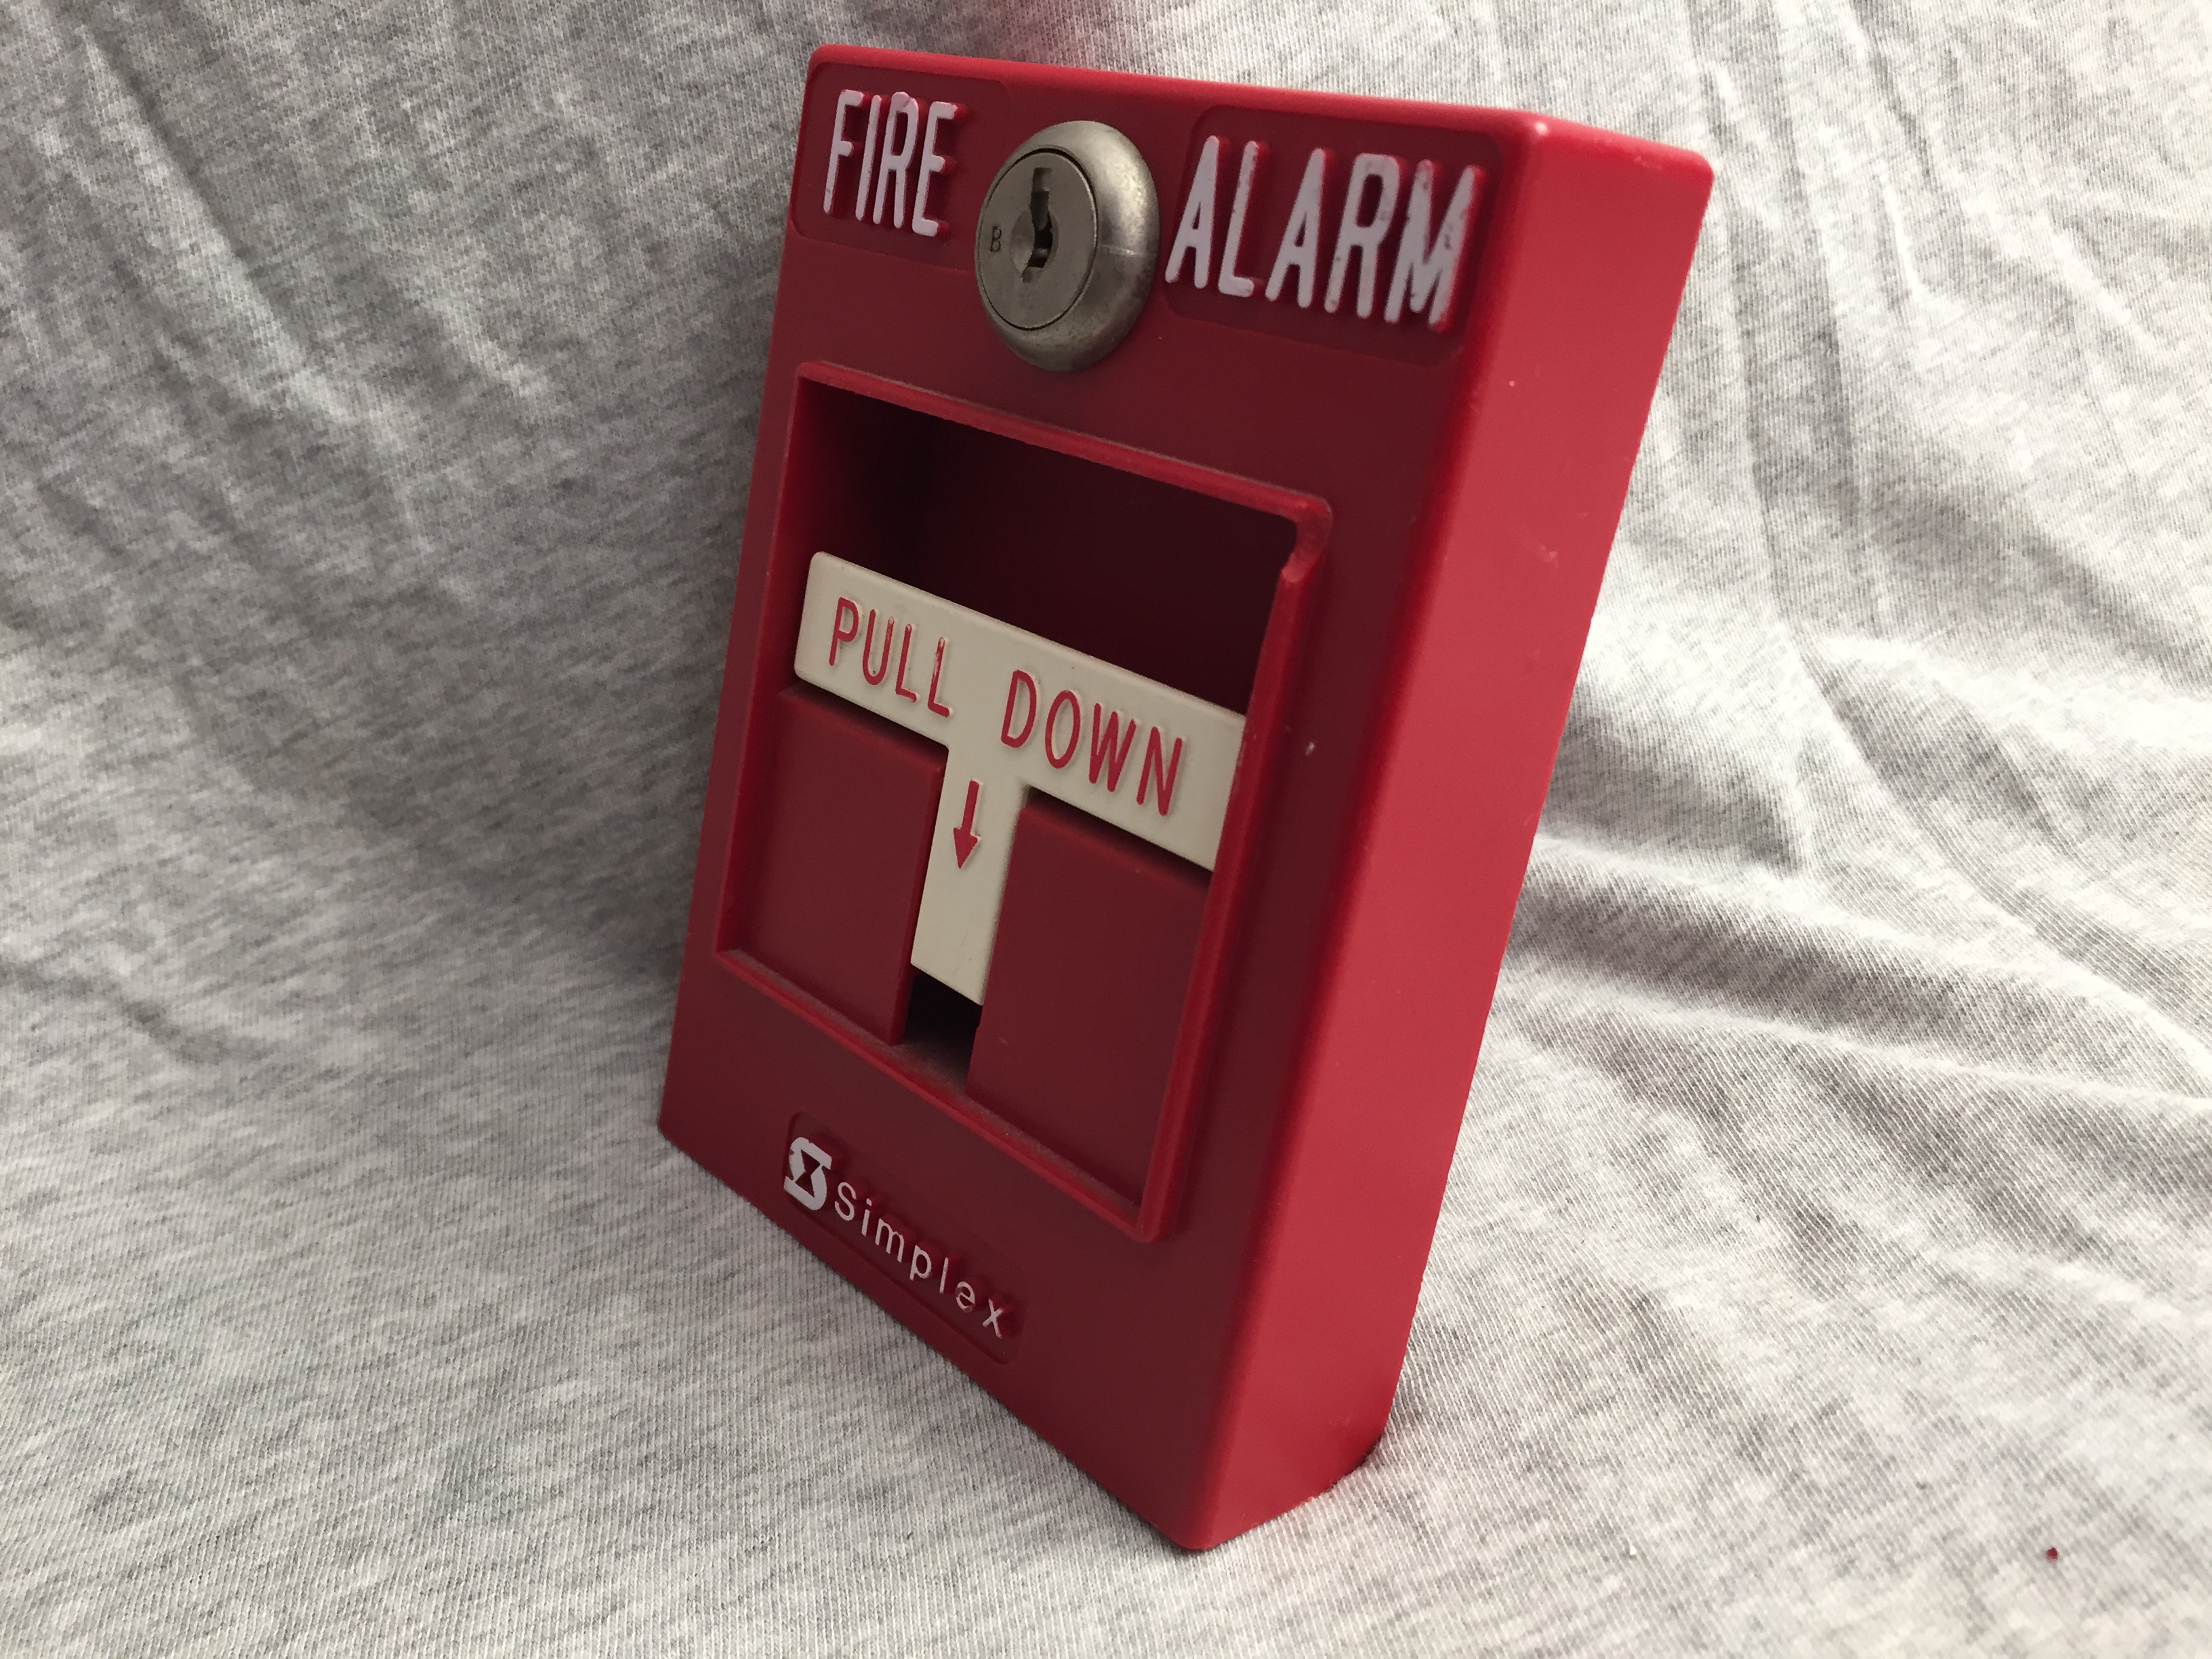 Simplex 2099-9754 - Fire Alarm Collection, Information, Pictures, and ...